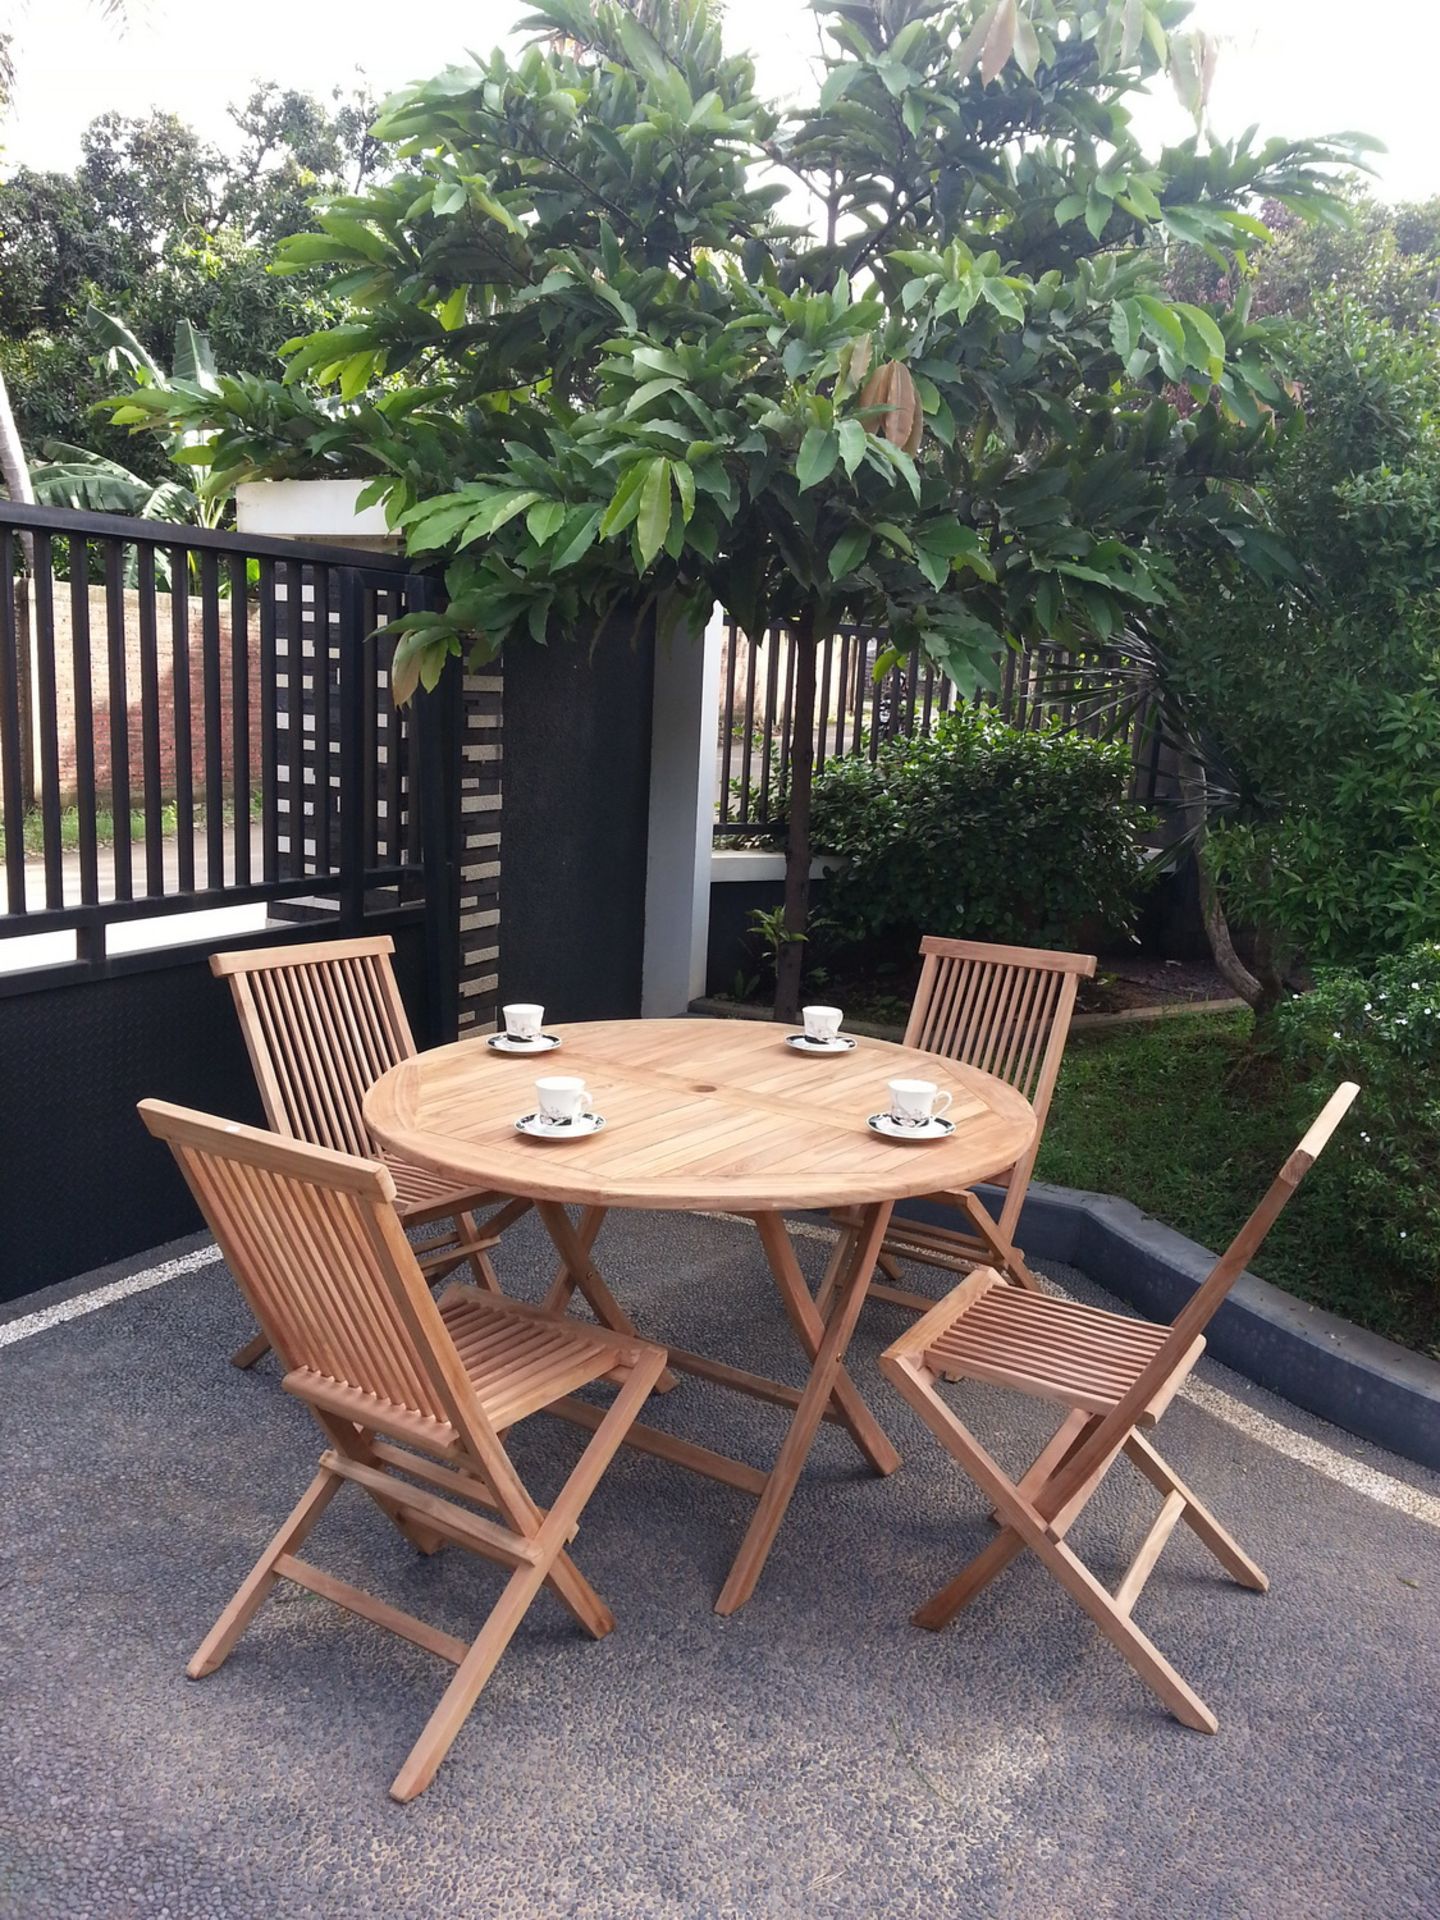 V Brand New Teak 120 cm Folding Table set / including 4 folding chairs and 4 cushion/ RRP £849.99/